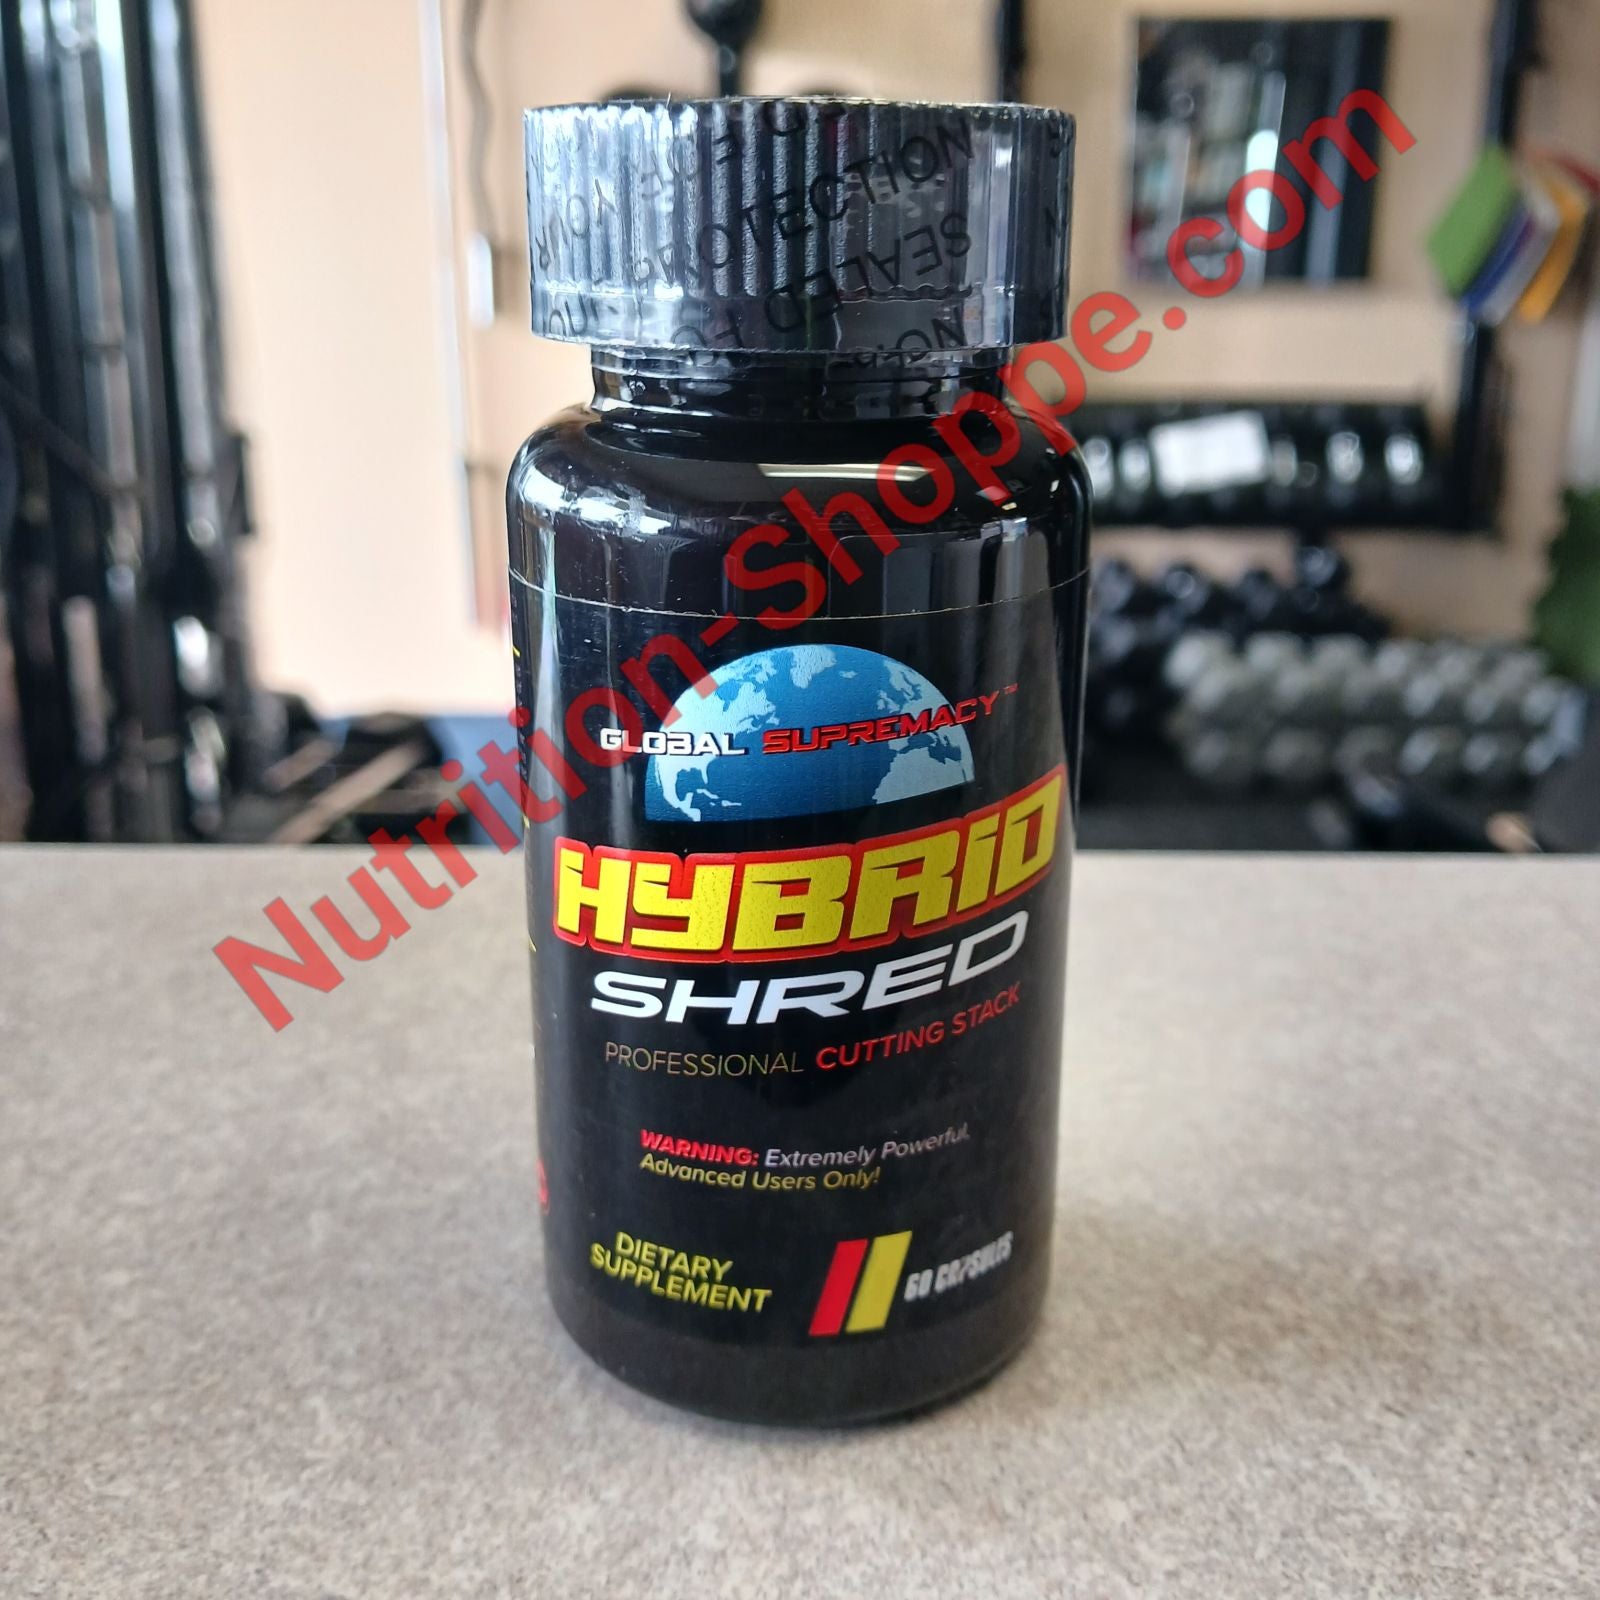 Global Supremacy HYBRID SHRED Professional Cutting Stack 60 Capsules